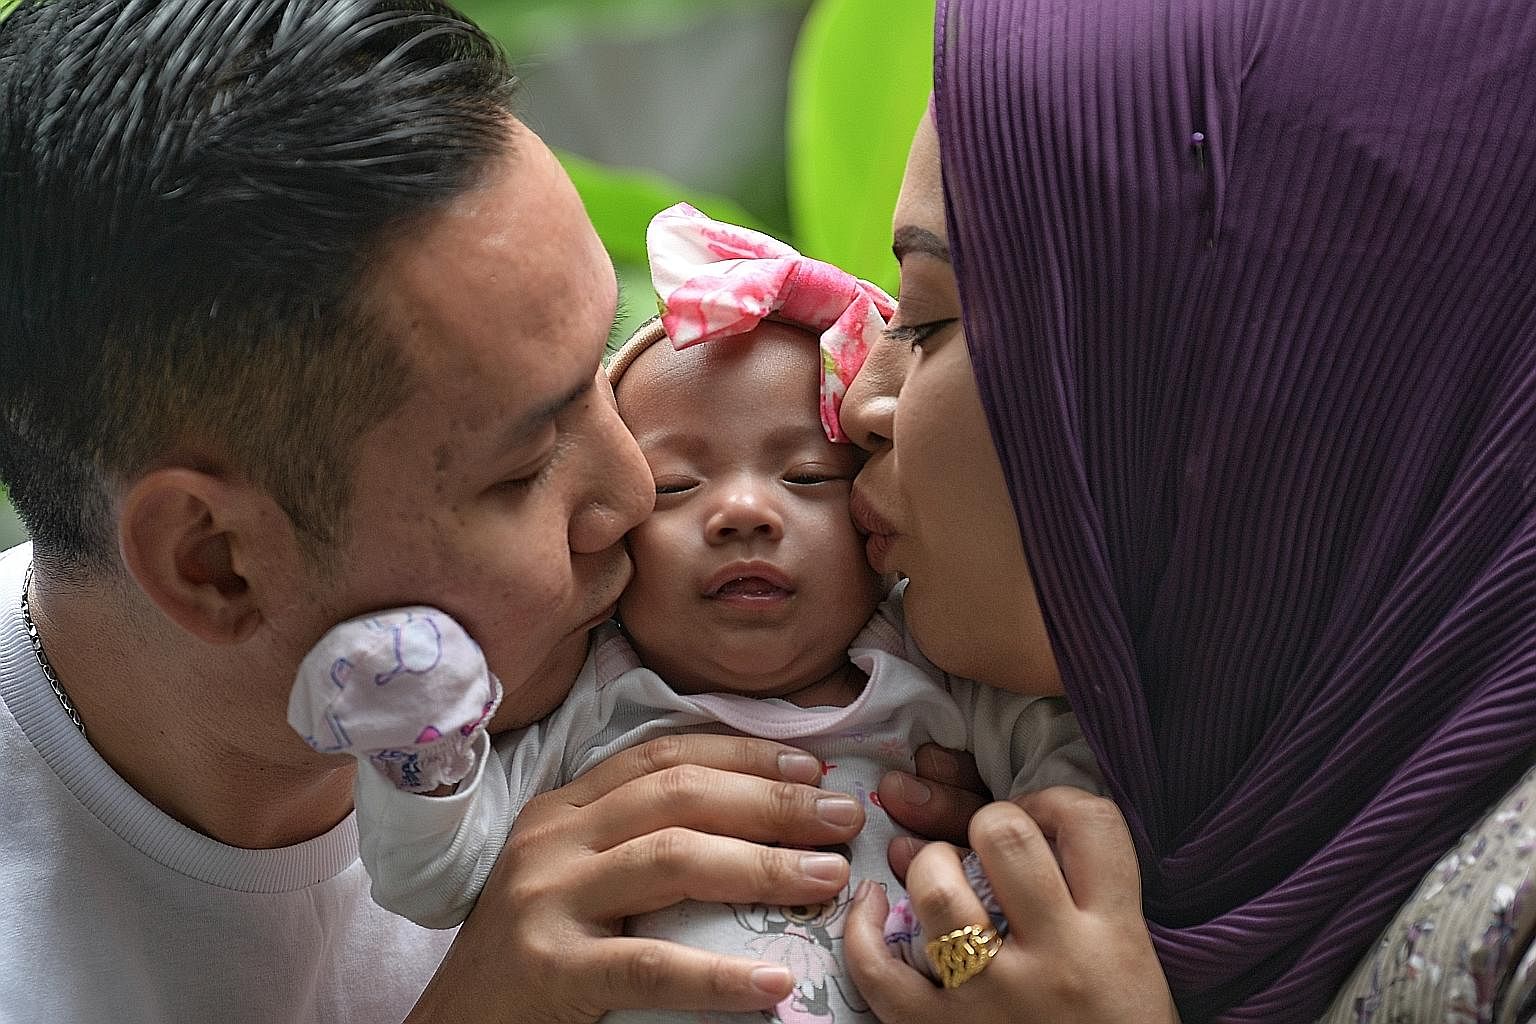 Seven-month-old Nur Zaiya - seen here with her parents Rohani Mustani, 37, and Muhammad Saufi Yusoff, 36 - was born on March 27 and is the smallest baby to be discharged from the National University Hospital. The couple have two other daughters, aged